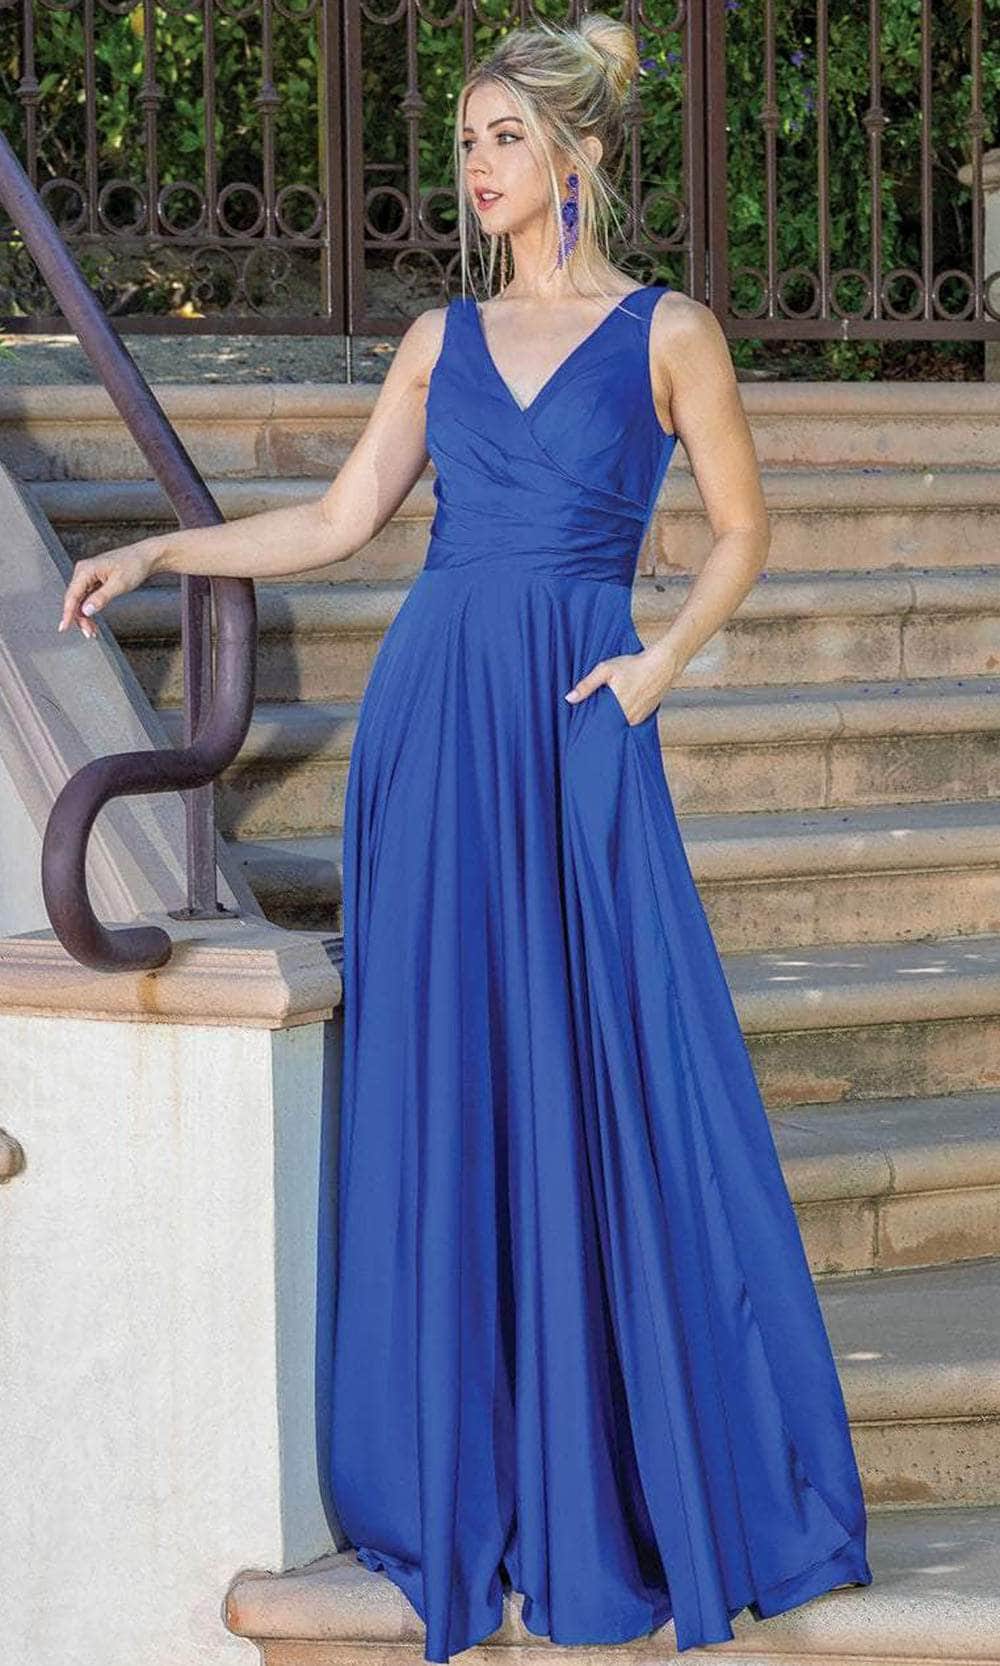 Dancing Queen 4262 - Sleeveless Satin A-Line Prom Dress Special Occasion Dress XS / Royal Blue